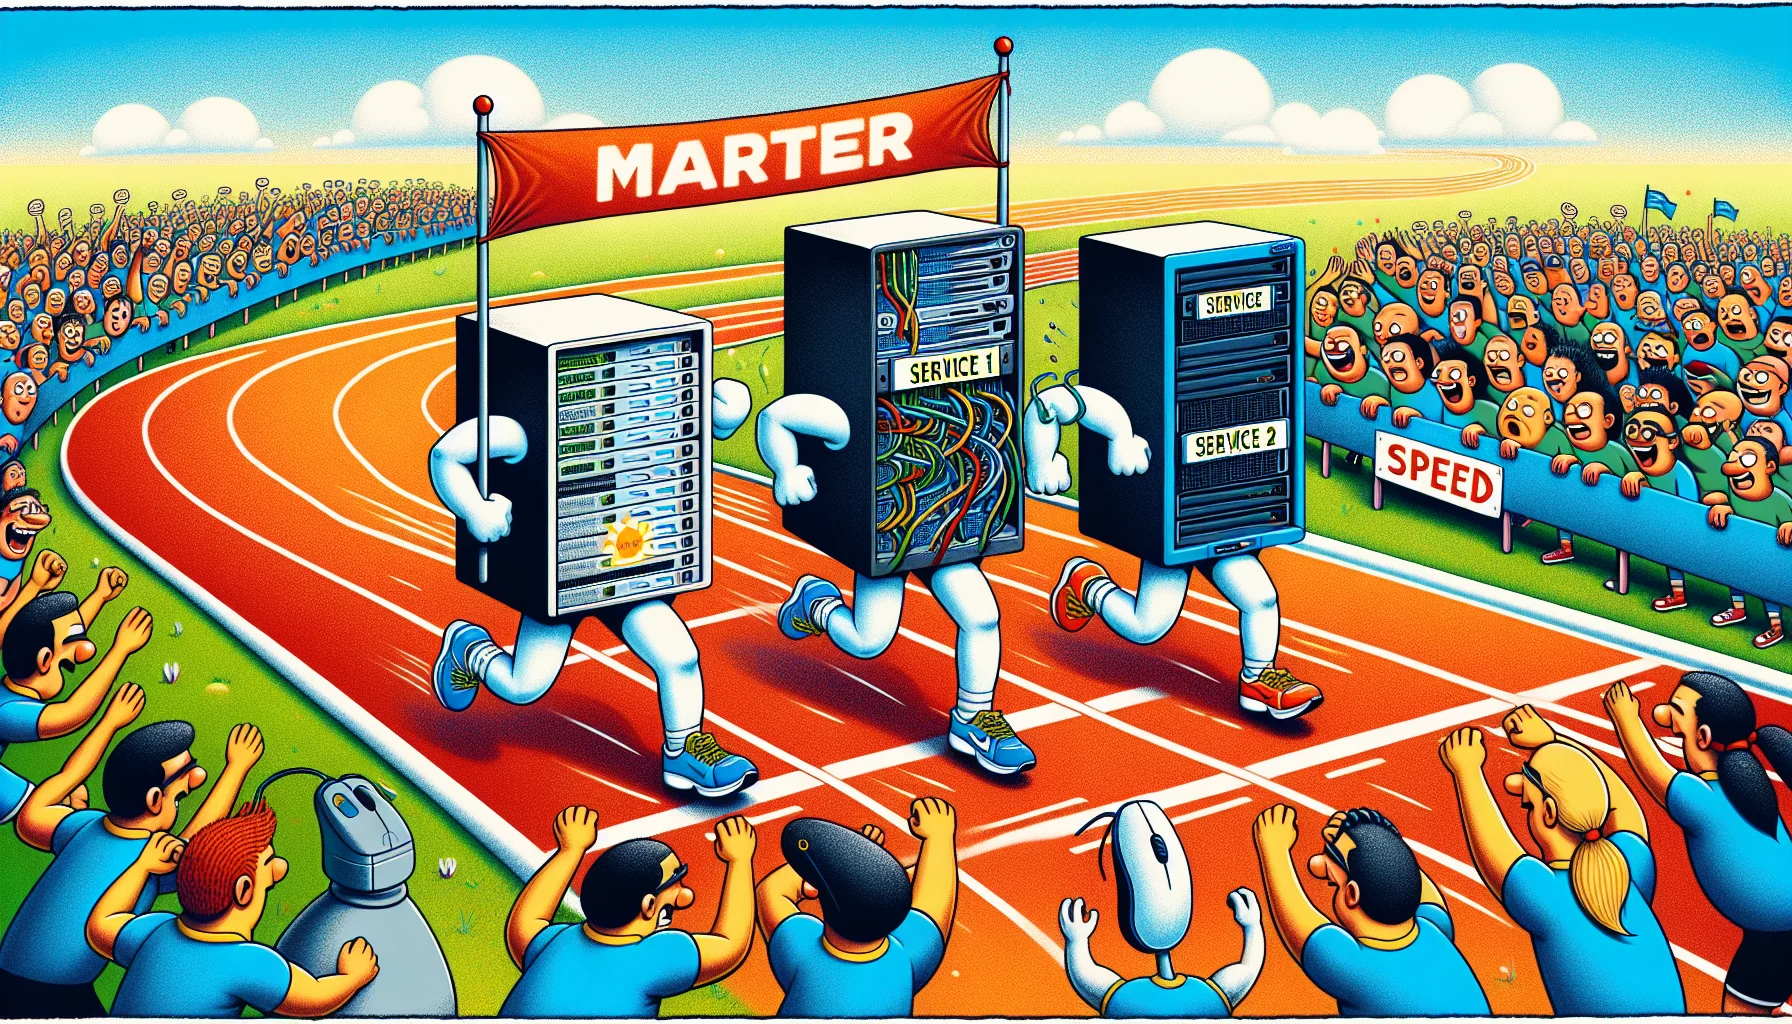 Generate a humorous and engaging image demonstrating the competition between two web hosting services. Show an illustrated race, with runners composed of web server elements representing 'Service 1' and 'Service 2'. In this marathon, the servers are not ordinary runners, but have legs and are racing towards the finish line. They each have a flag, one labeled 'Service 1' and the other labeled 'Service 2'. A crowd of computer mice, keyboards, and screens watches in amusement, cheering them on. Some mice are chuckling, some screens are displaying witty phrases about web hosting speed and reliability. The whole scene is wrapped in a colorful, playful aura.